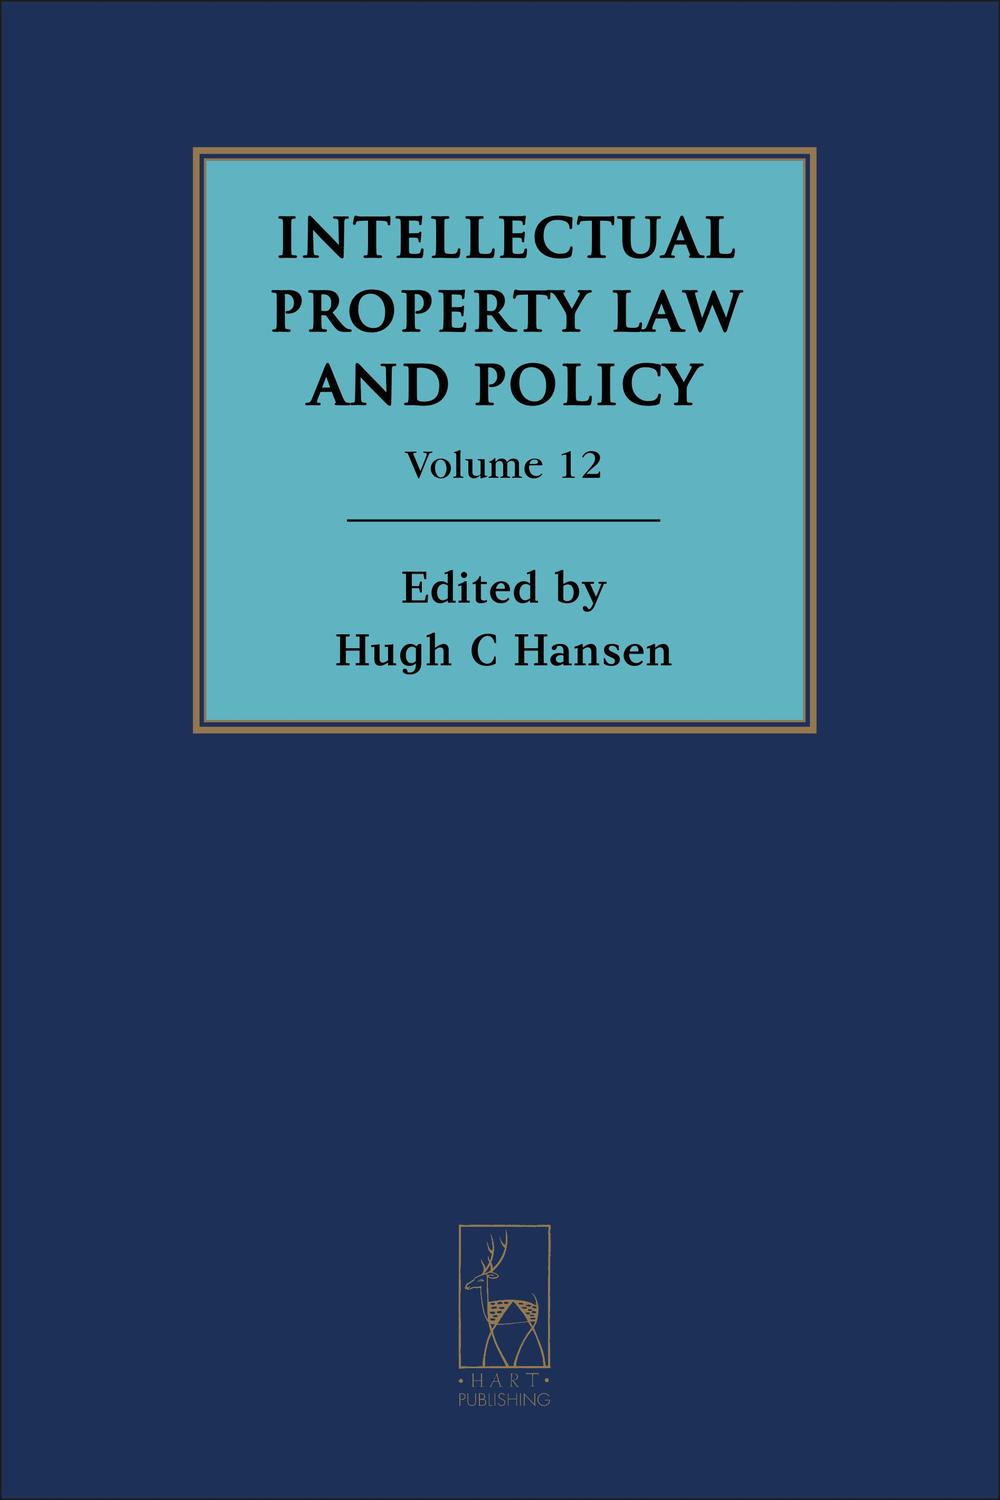 Intellectual Property Law and Policy Volume 12 - Hugh Hansen